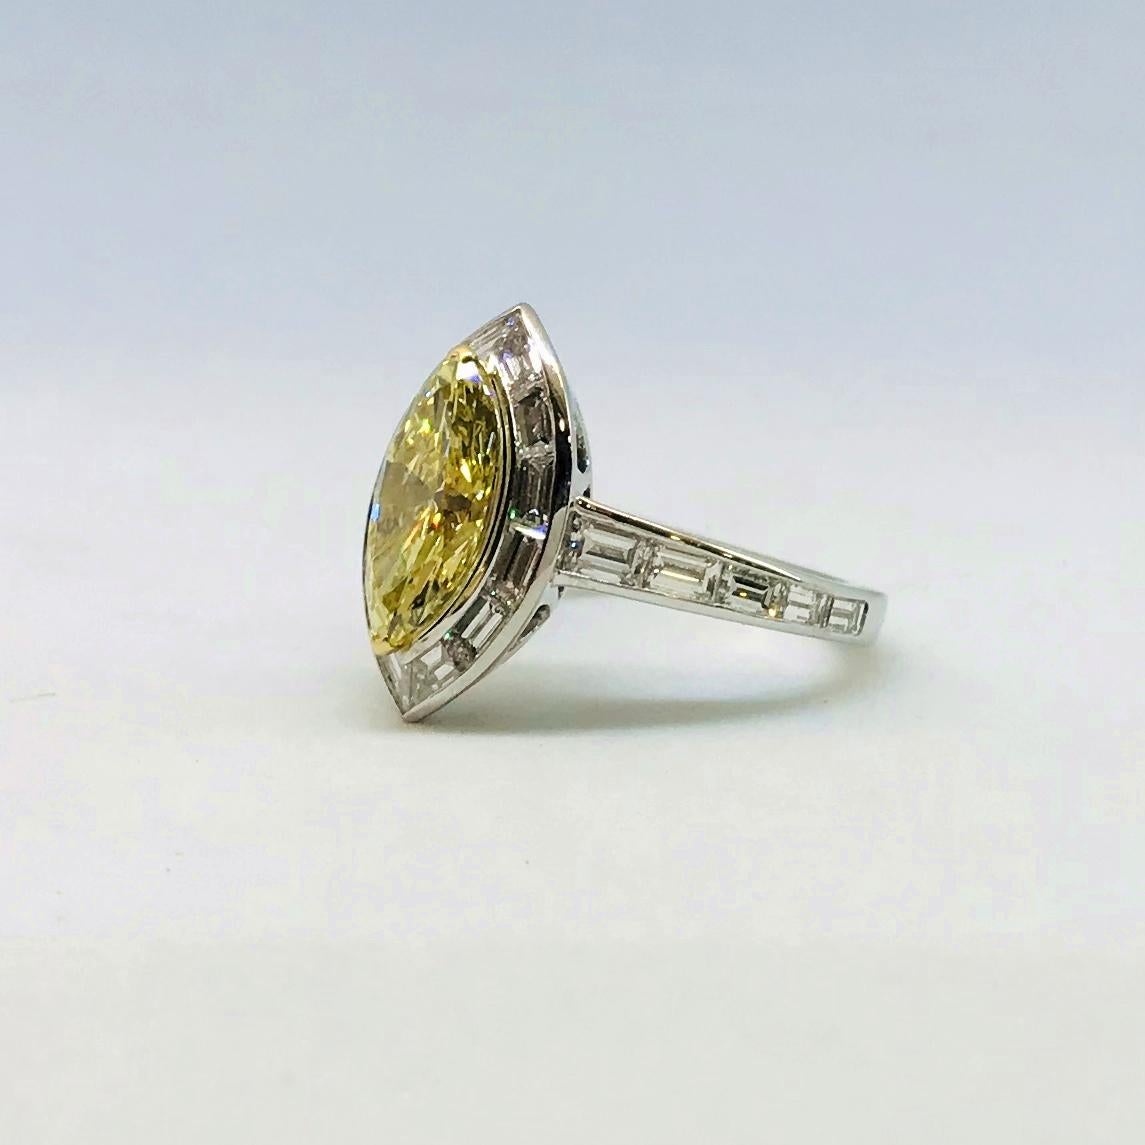 One Fancy Intense Yellow, GIA certified, marquise-cut diamond ring.  The platinum ring centers the marquise-cut diamond, weighing 2.21 cts with VS2 clarity, mounted with 2-“V”-shaped, 18 Karat yellow gold prongs which is then surrounded by a single